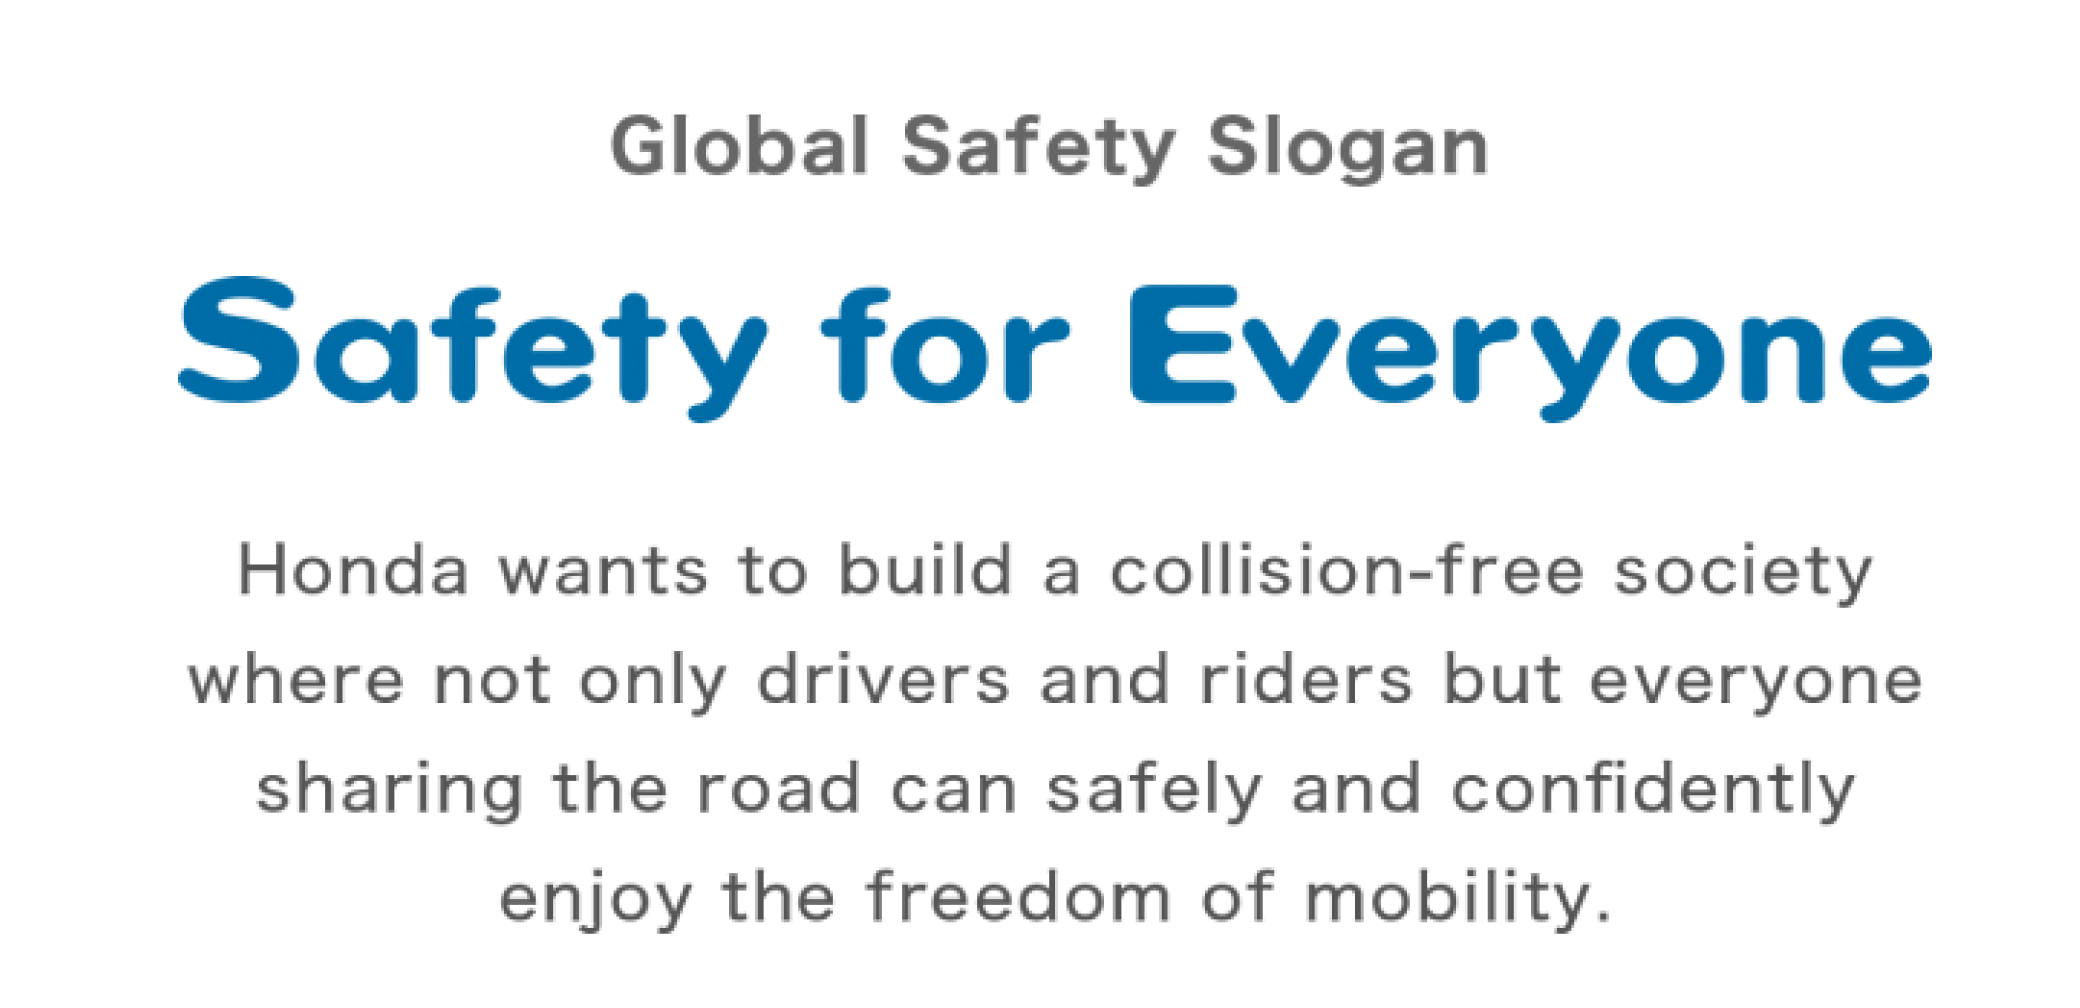 Honda’s Global Safety Slogan - Safety for Everyone